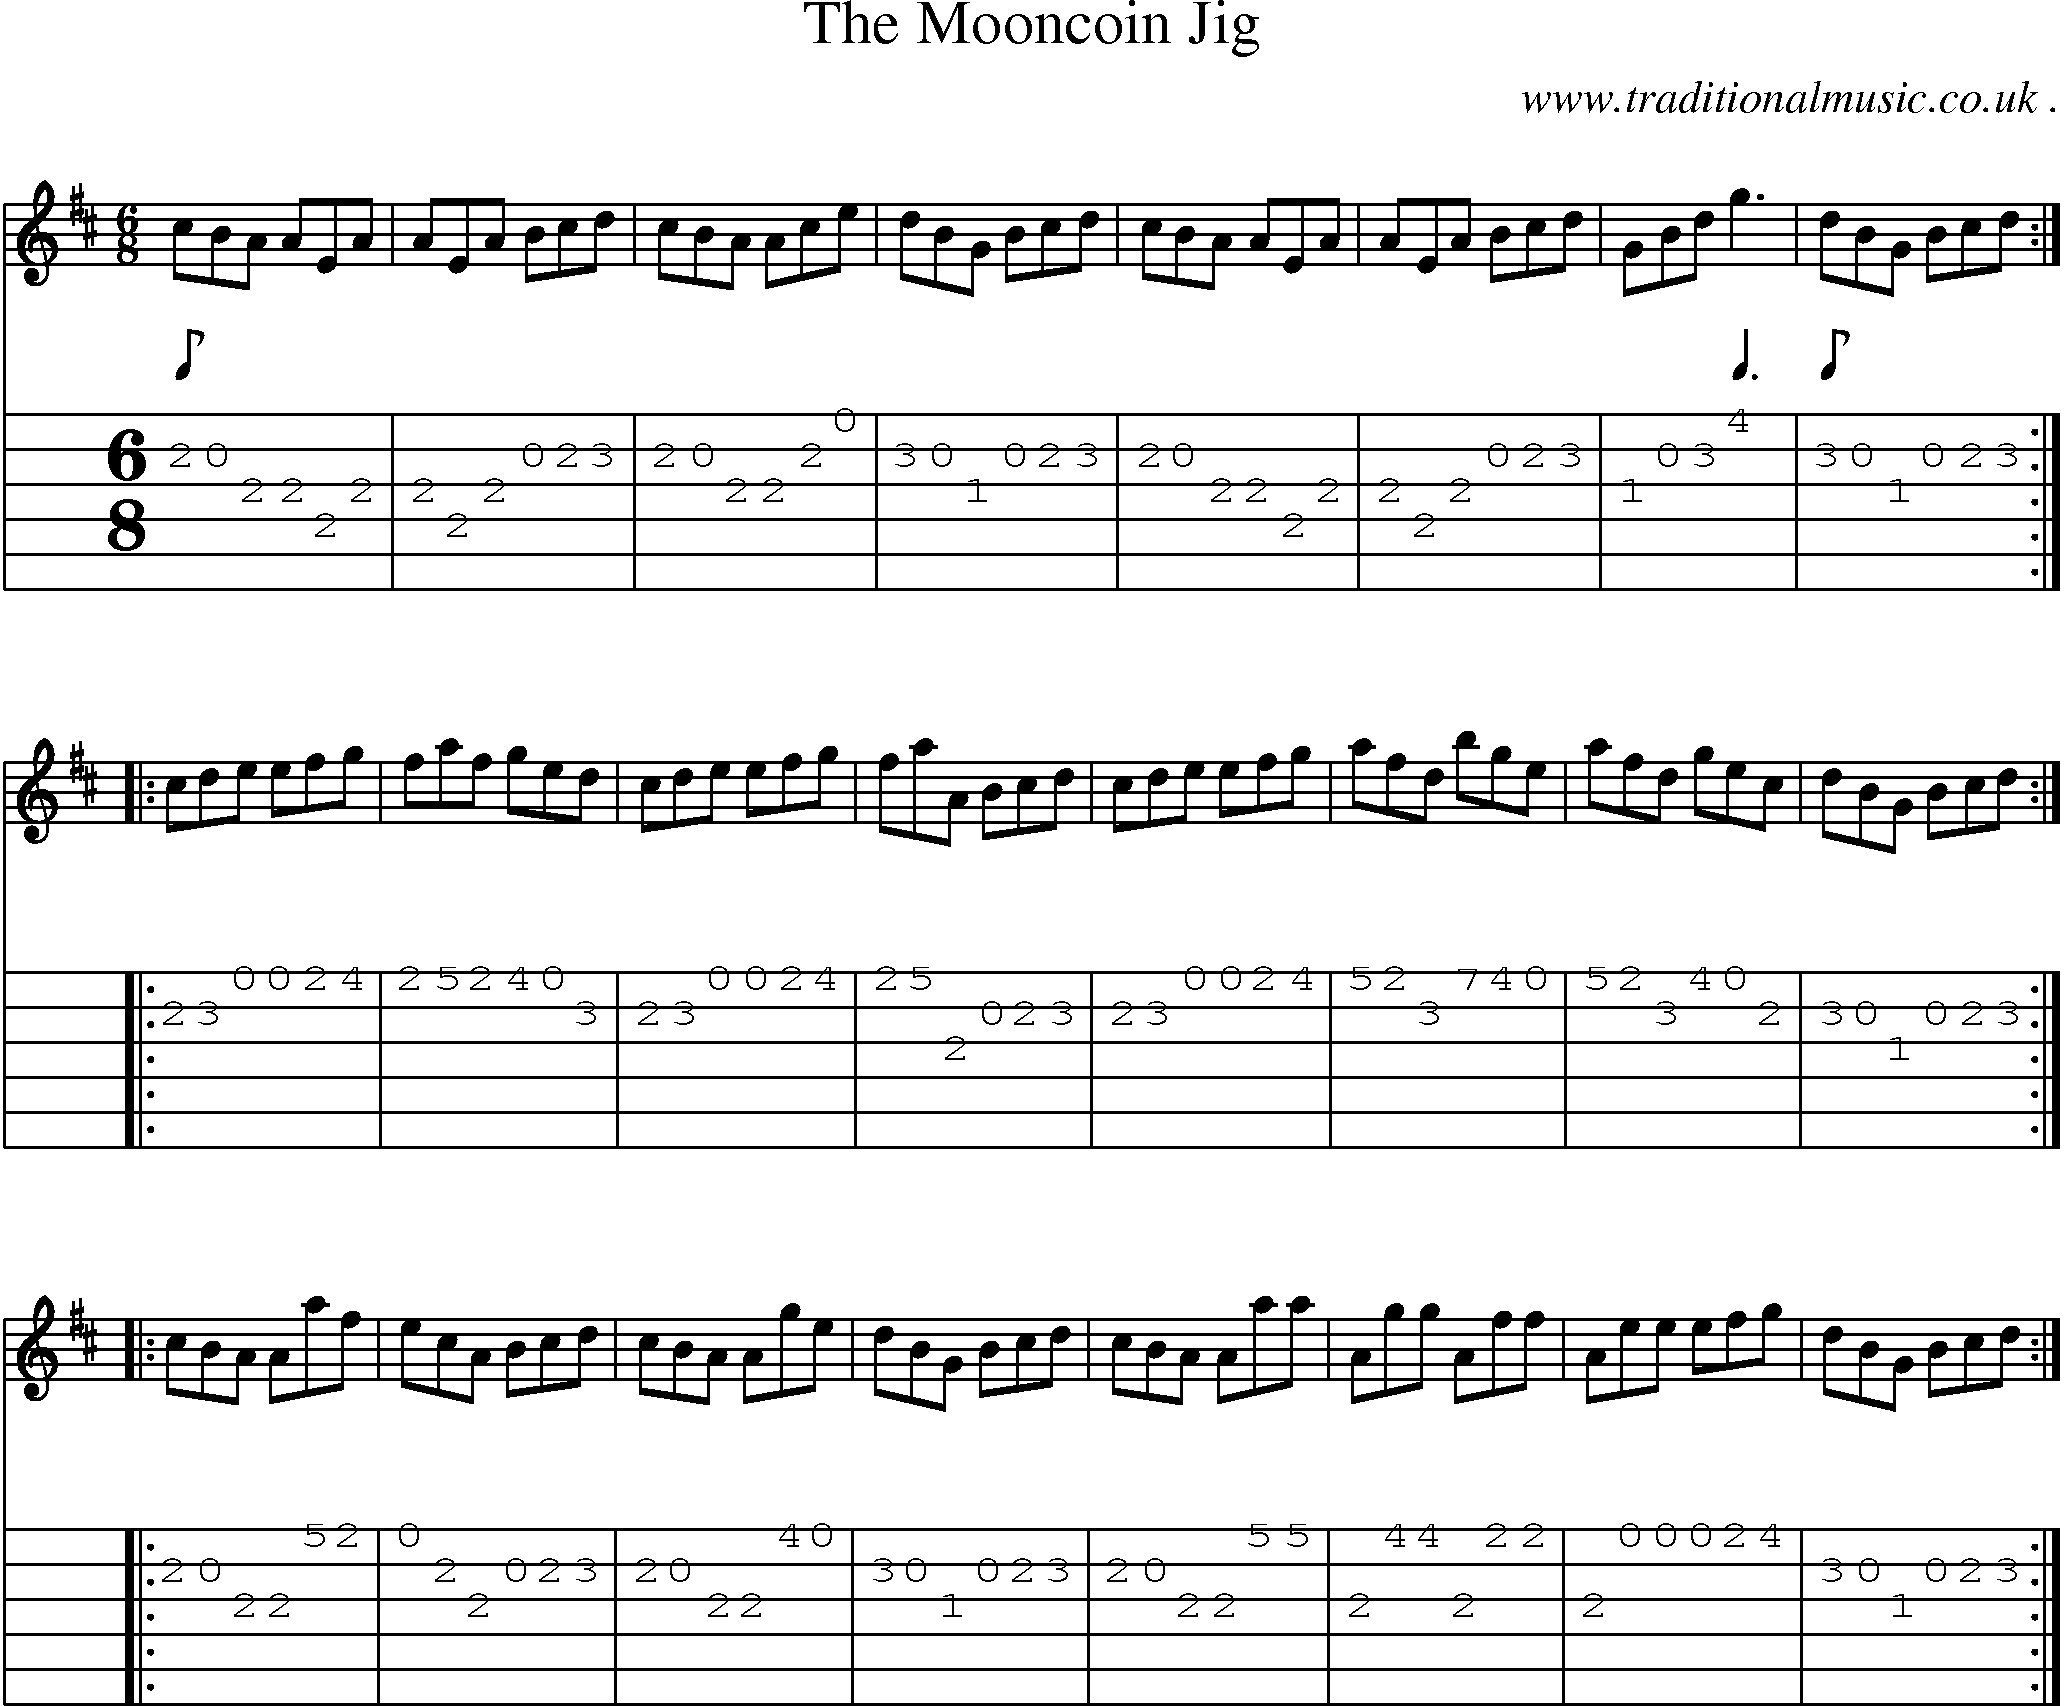 Sheet-Music and Guitar Tabs for The Mooncoin Jig